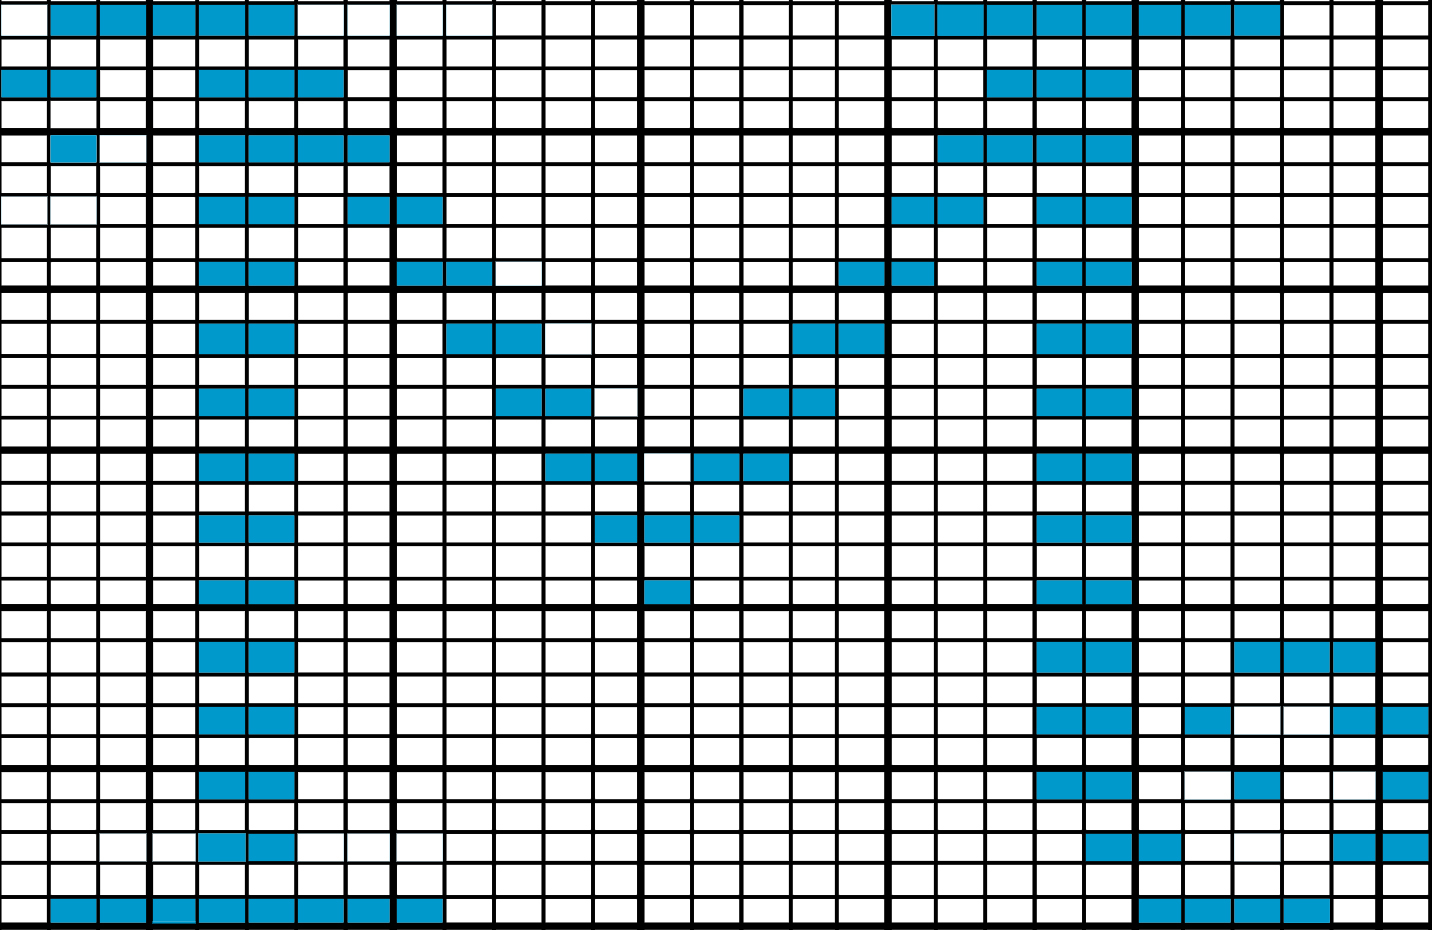 Graph Paper For Knitting Patterns Alphabet On Graph Paper For Knitting Seattlebaco